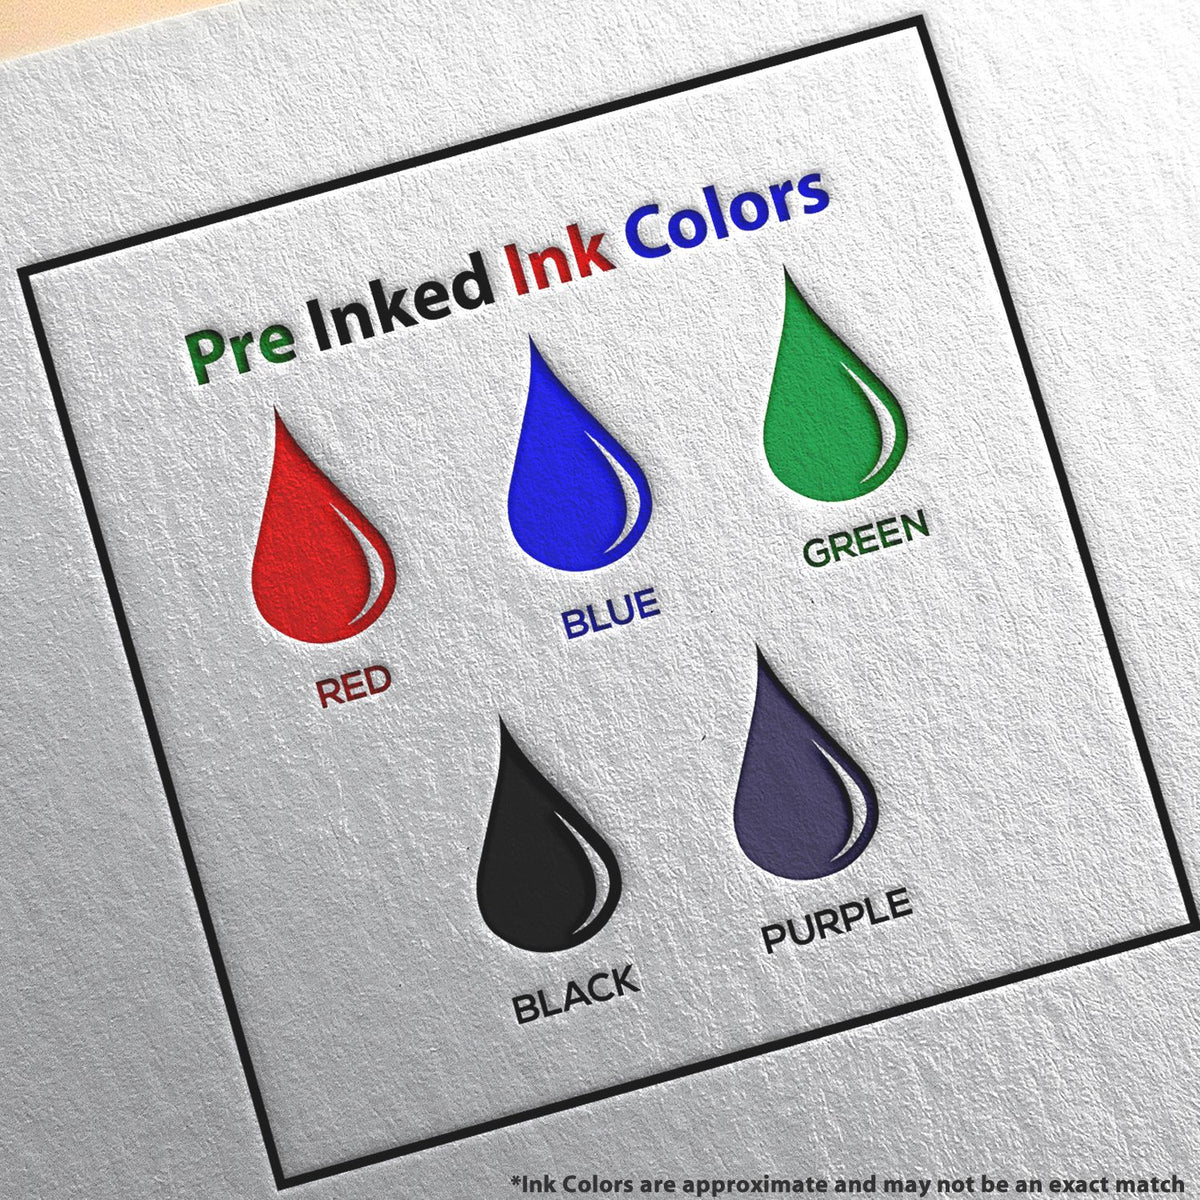 A picture showing the different ink colors or hues available for the Slim Pre-Inked Illinois Professional Engineer Seal Stamp product.